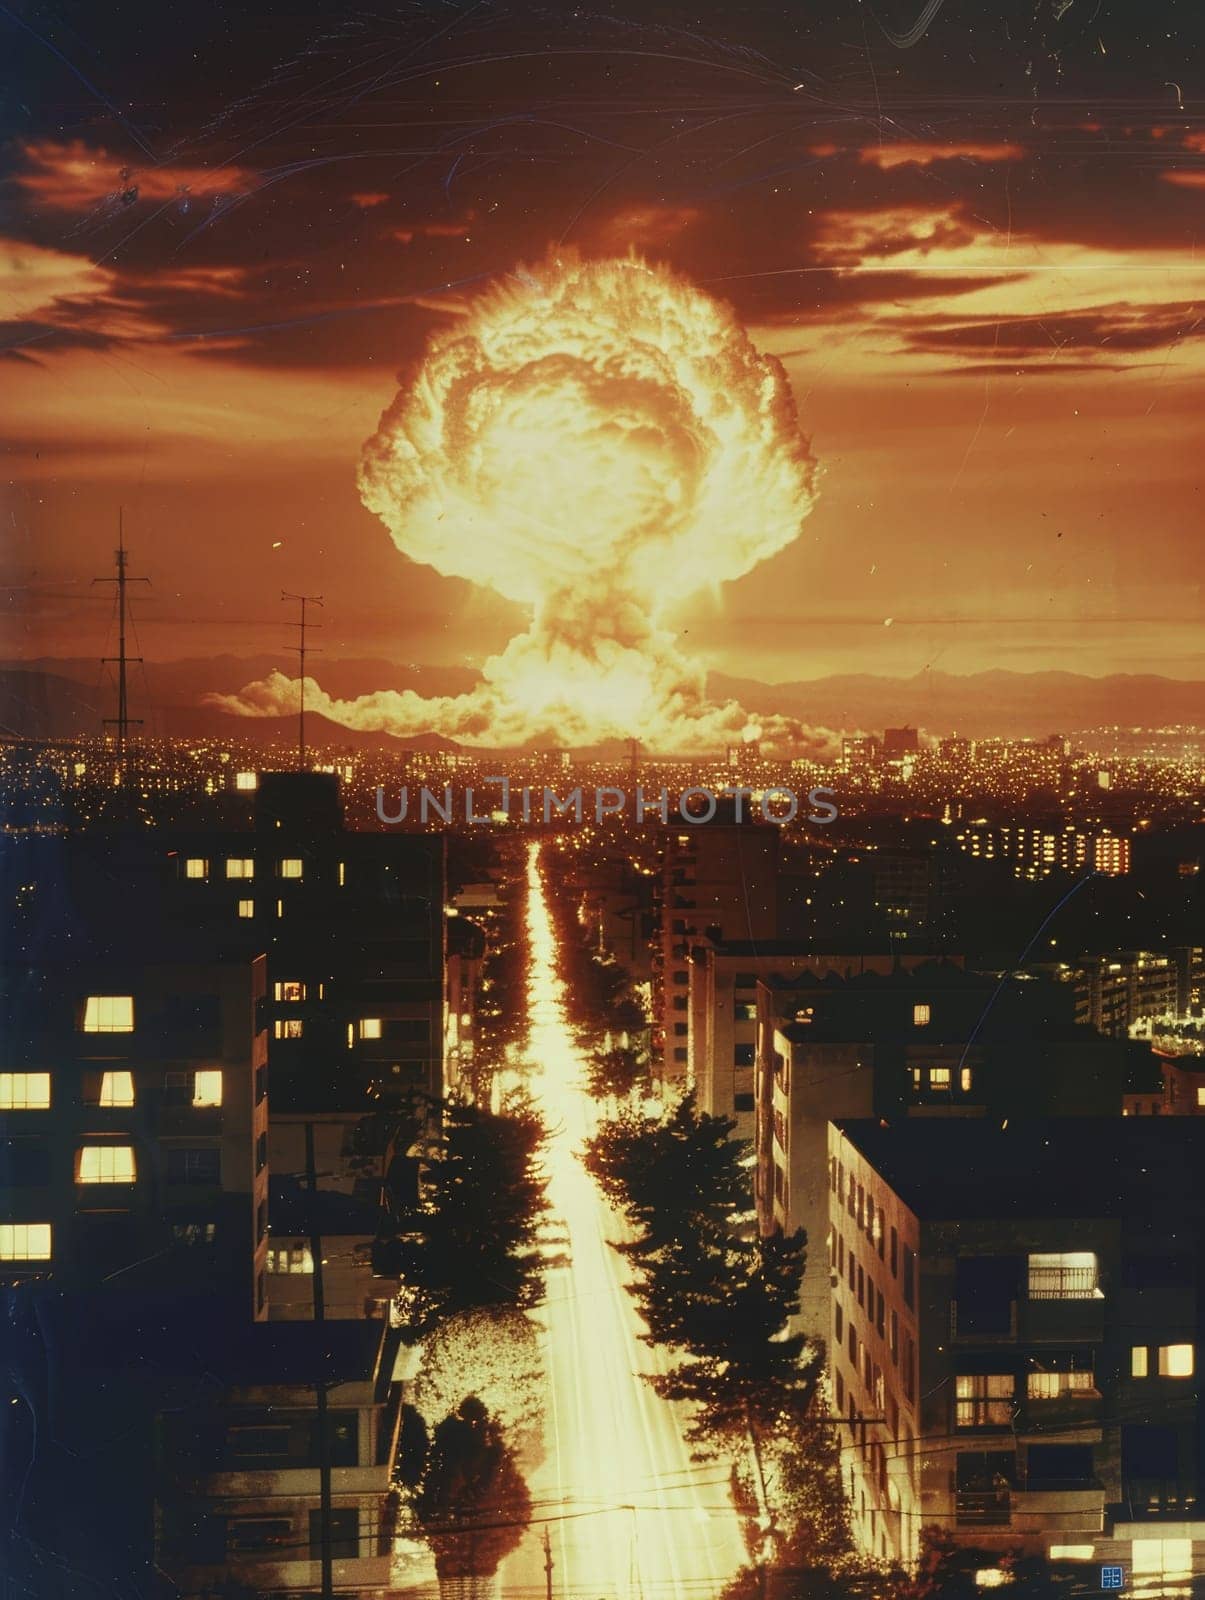 A retro-style image depicts an intense explosion over a cityscape at night, creating an atmosphere of science fiction and historical drama.